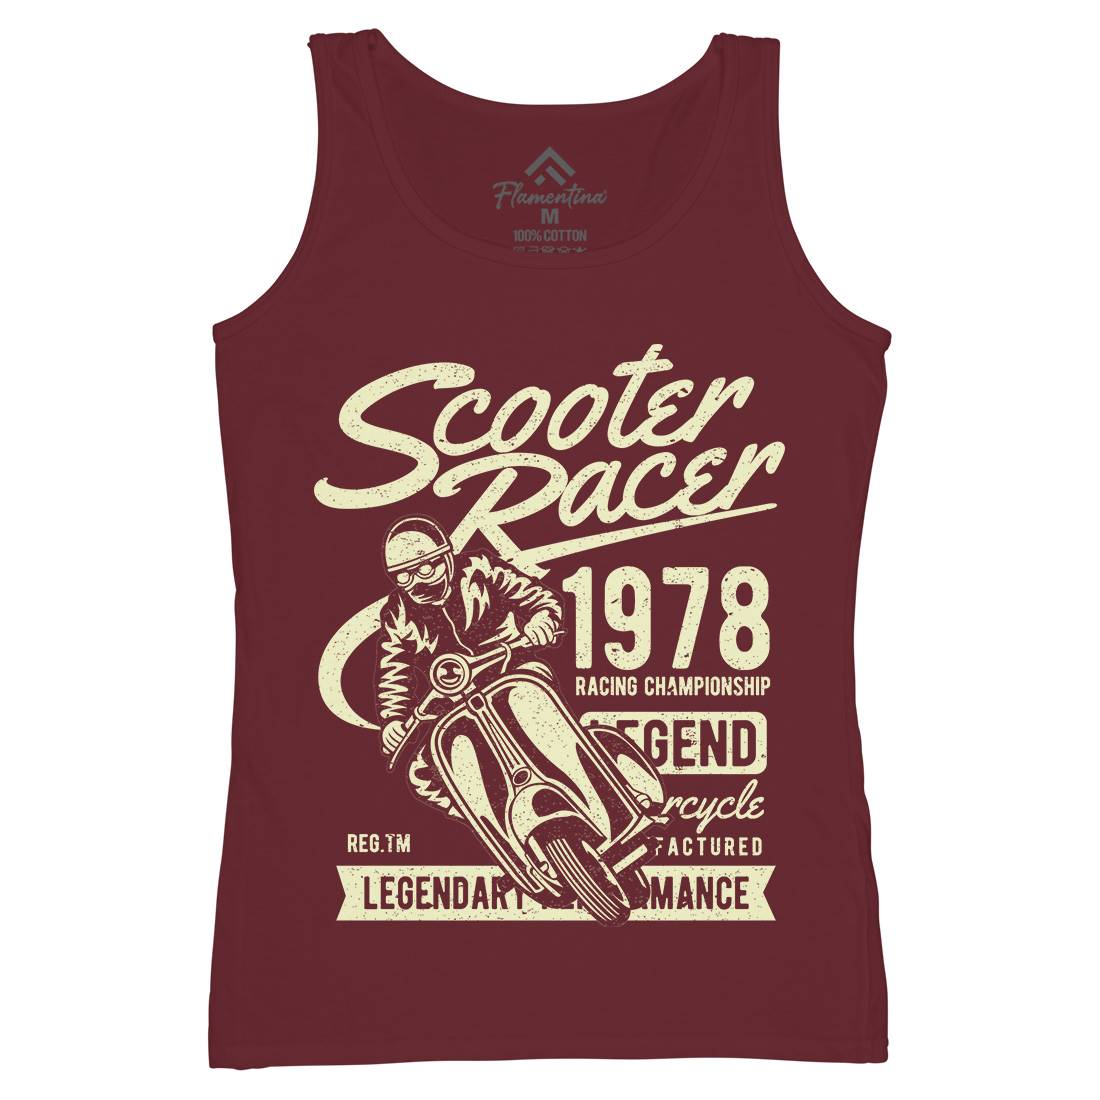 Scooter Racer Womens Organic Tank Top Vest Motorcycles A136